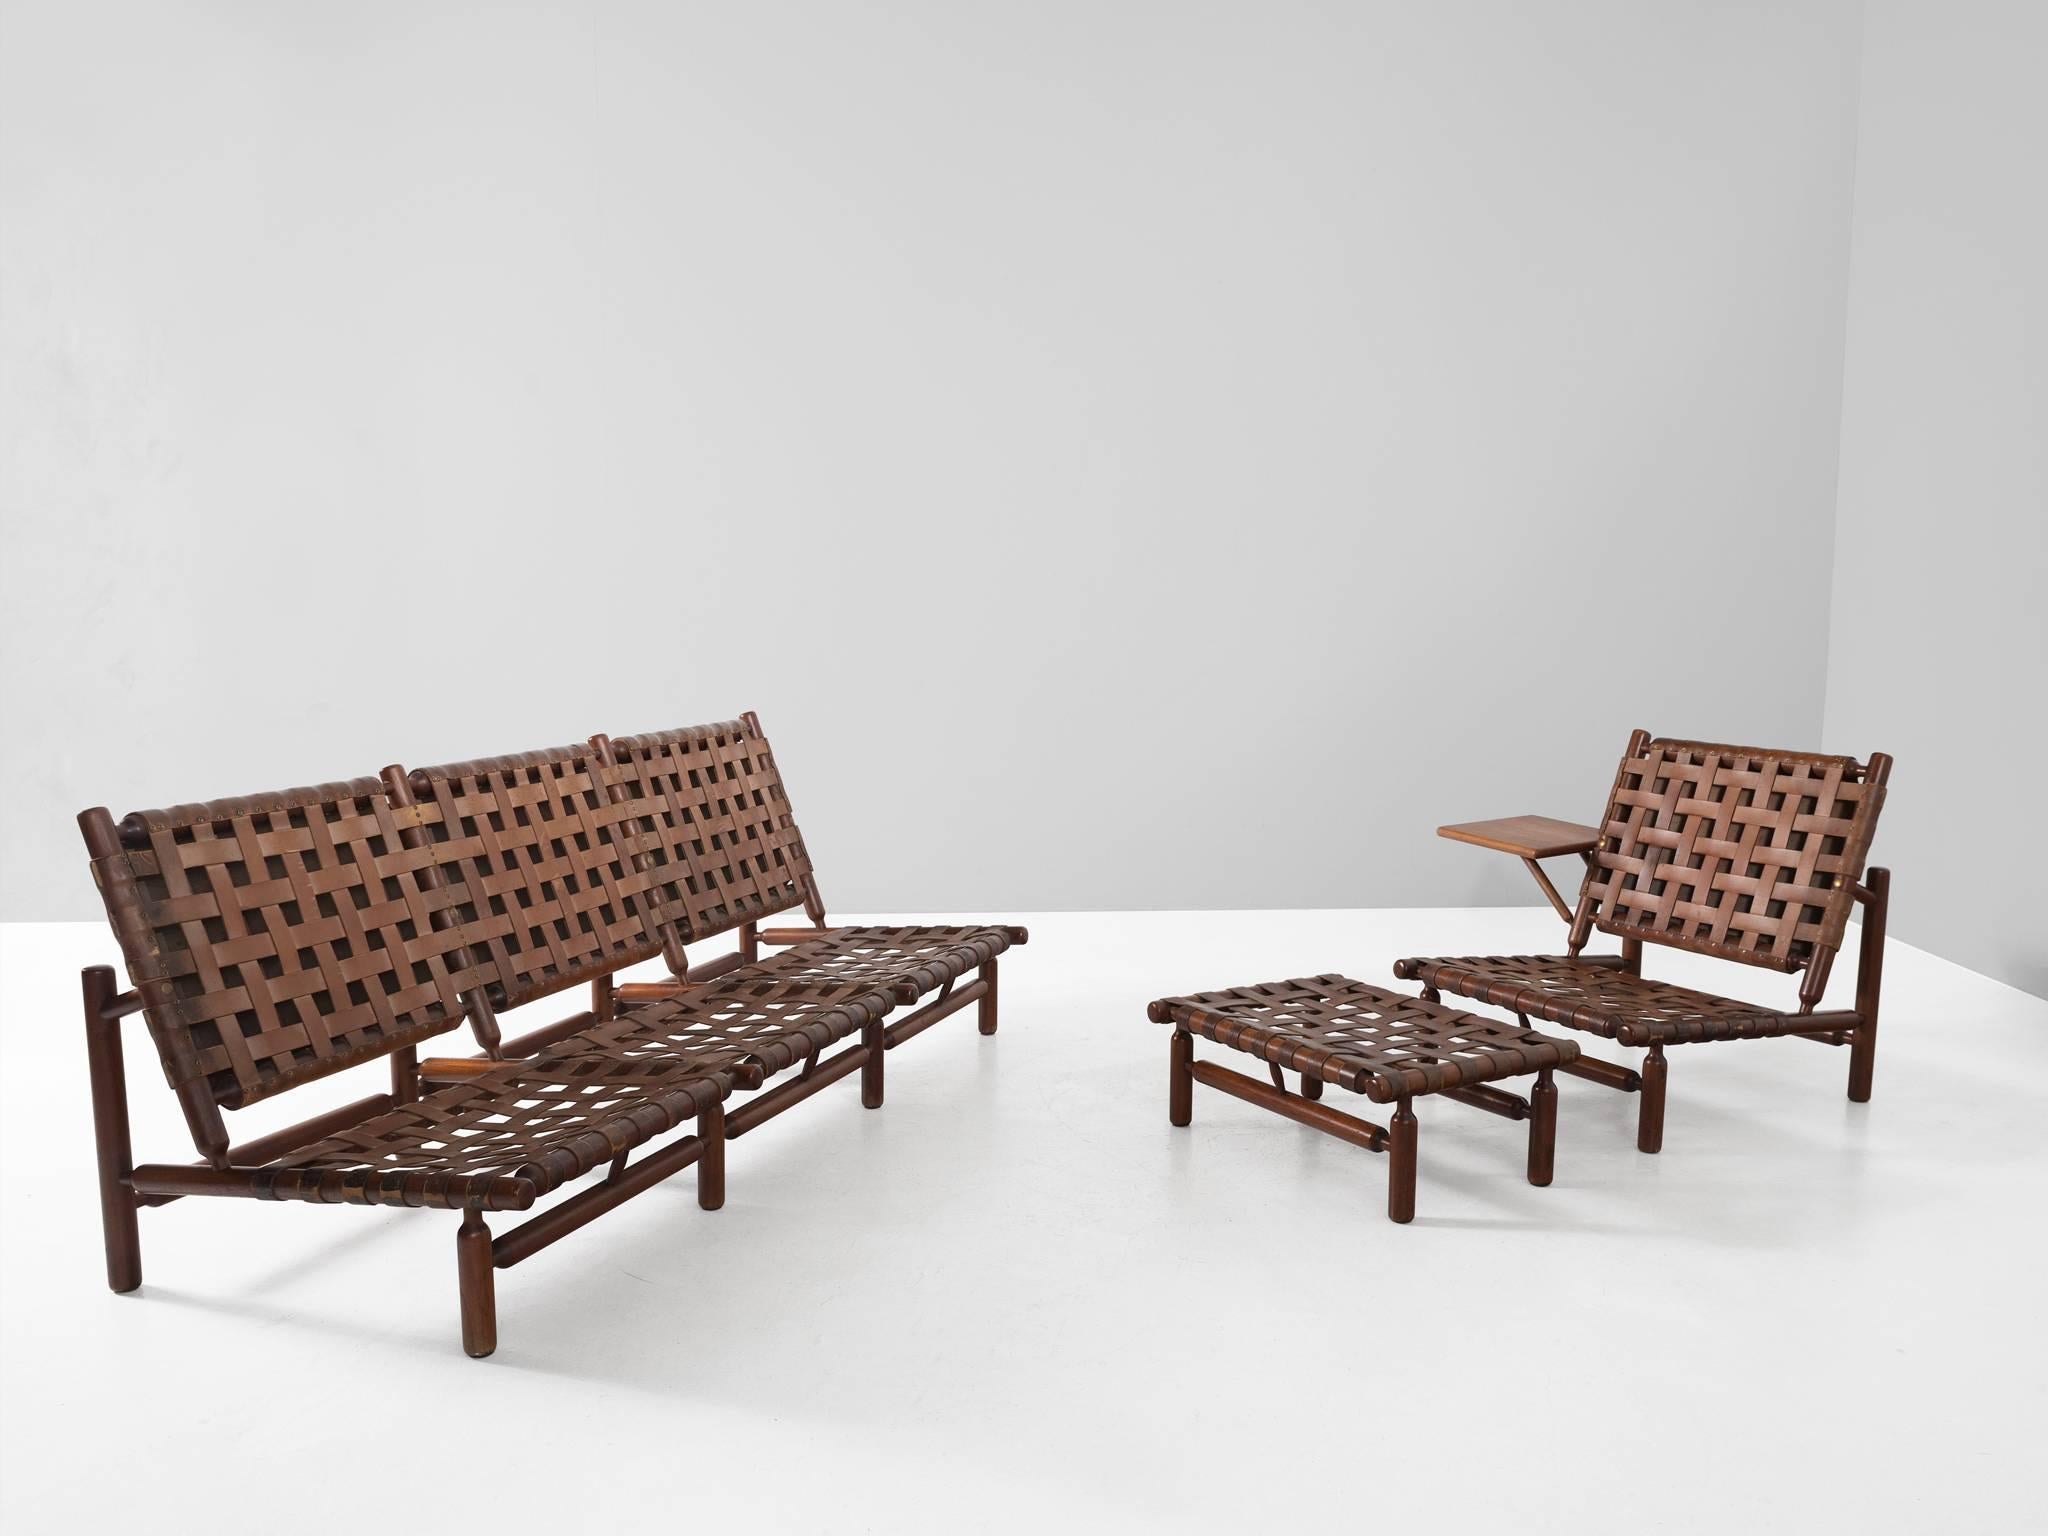 Sofa and lounge chair, in teak and leather, by Ilmari Tapiovaara for Esposizione La Permanente Mobili, Italy, 1957. 

Rare three-seat sofa and lounge chair by Finnish designer Ilmari Tapiovaara. This organic design features beautiful leather